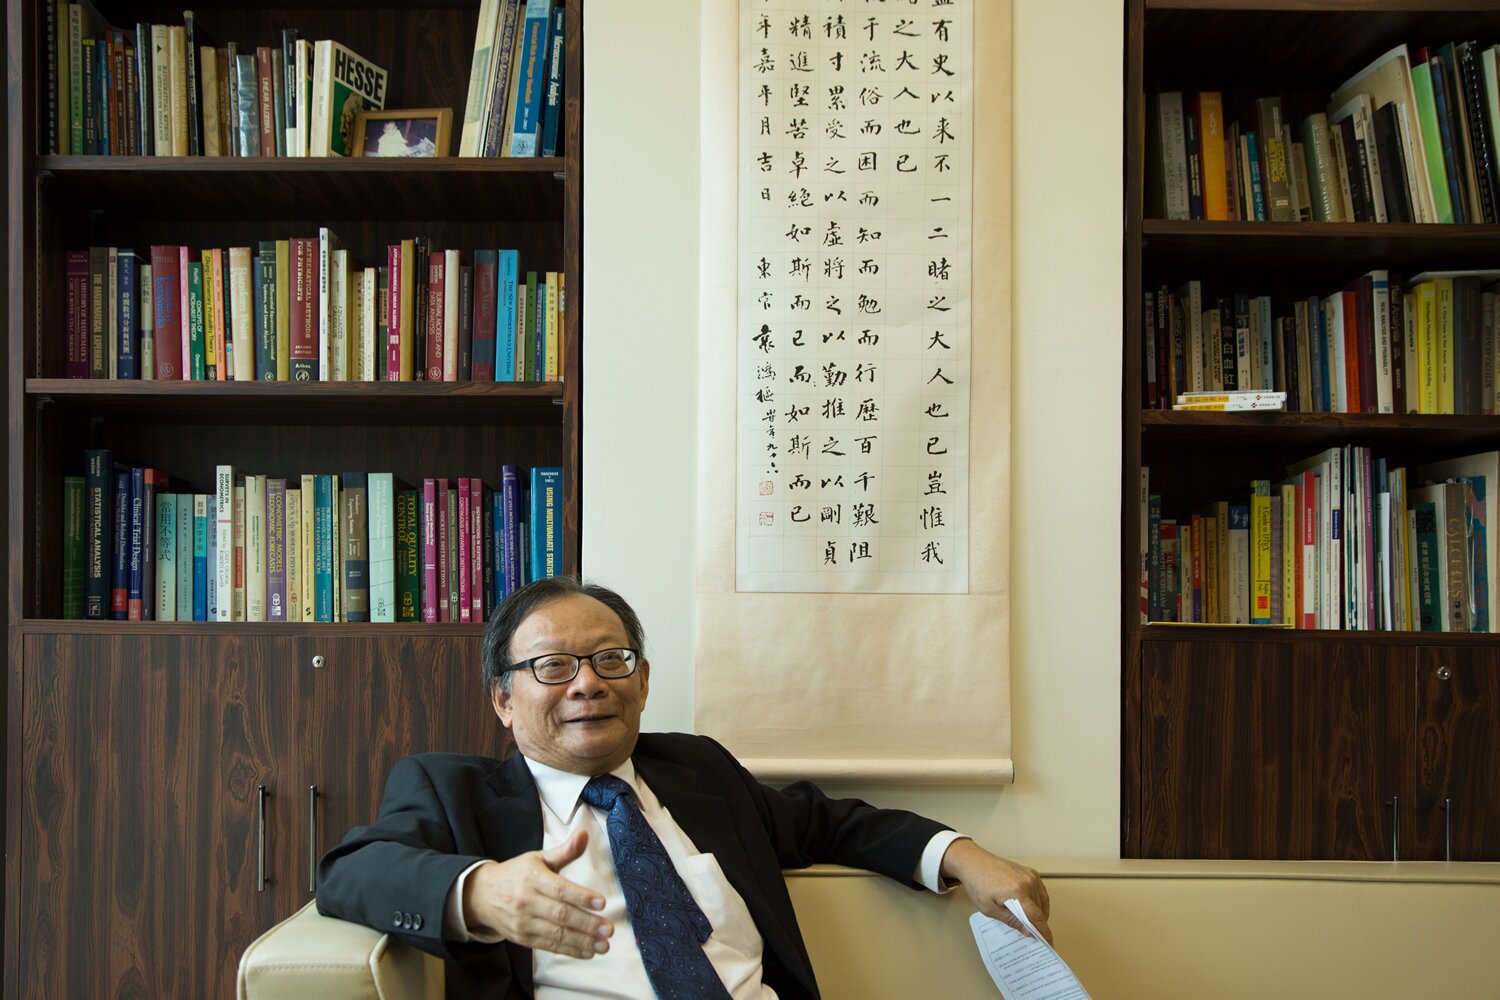 Referring to the experience of Mr Zeng Guofan (曾國藩) and Mr Liang Qichao (梁啟超) in the Qing Dynasty, Professor Li emphasised that perseverance and diligence have been his motto throughout his four-decade career as a researcher and will continue to guide him in his new deanship role. “We should trust ourselves and our team despite the ups and downs,” he said. “My experience has shown that we will ultimately find a solution.”